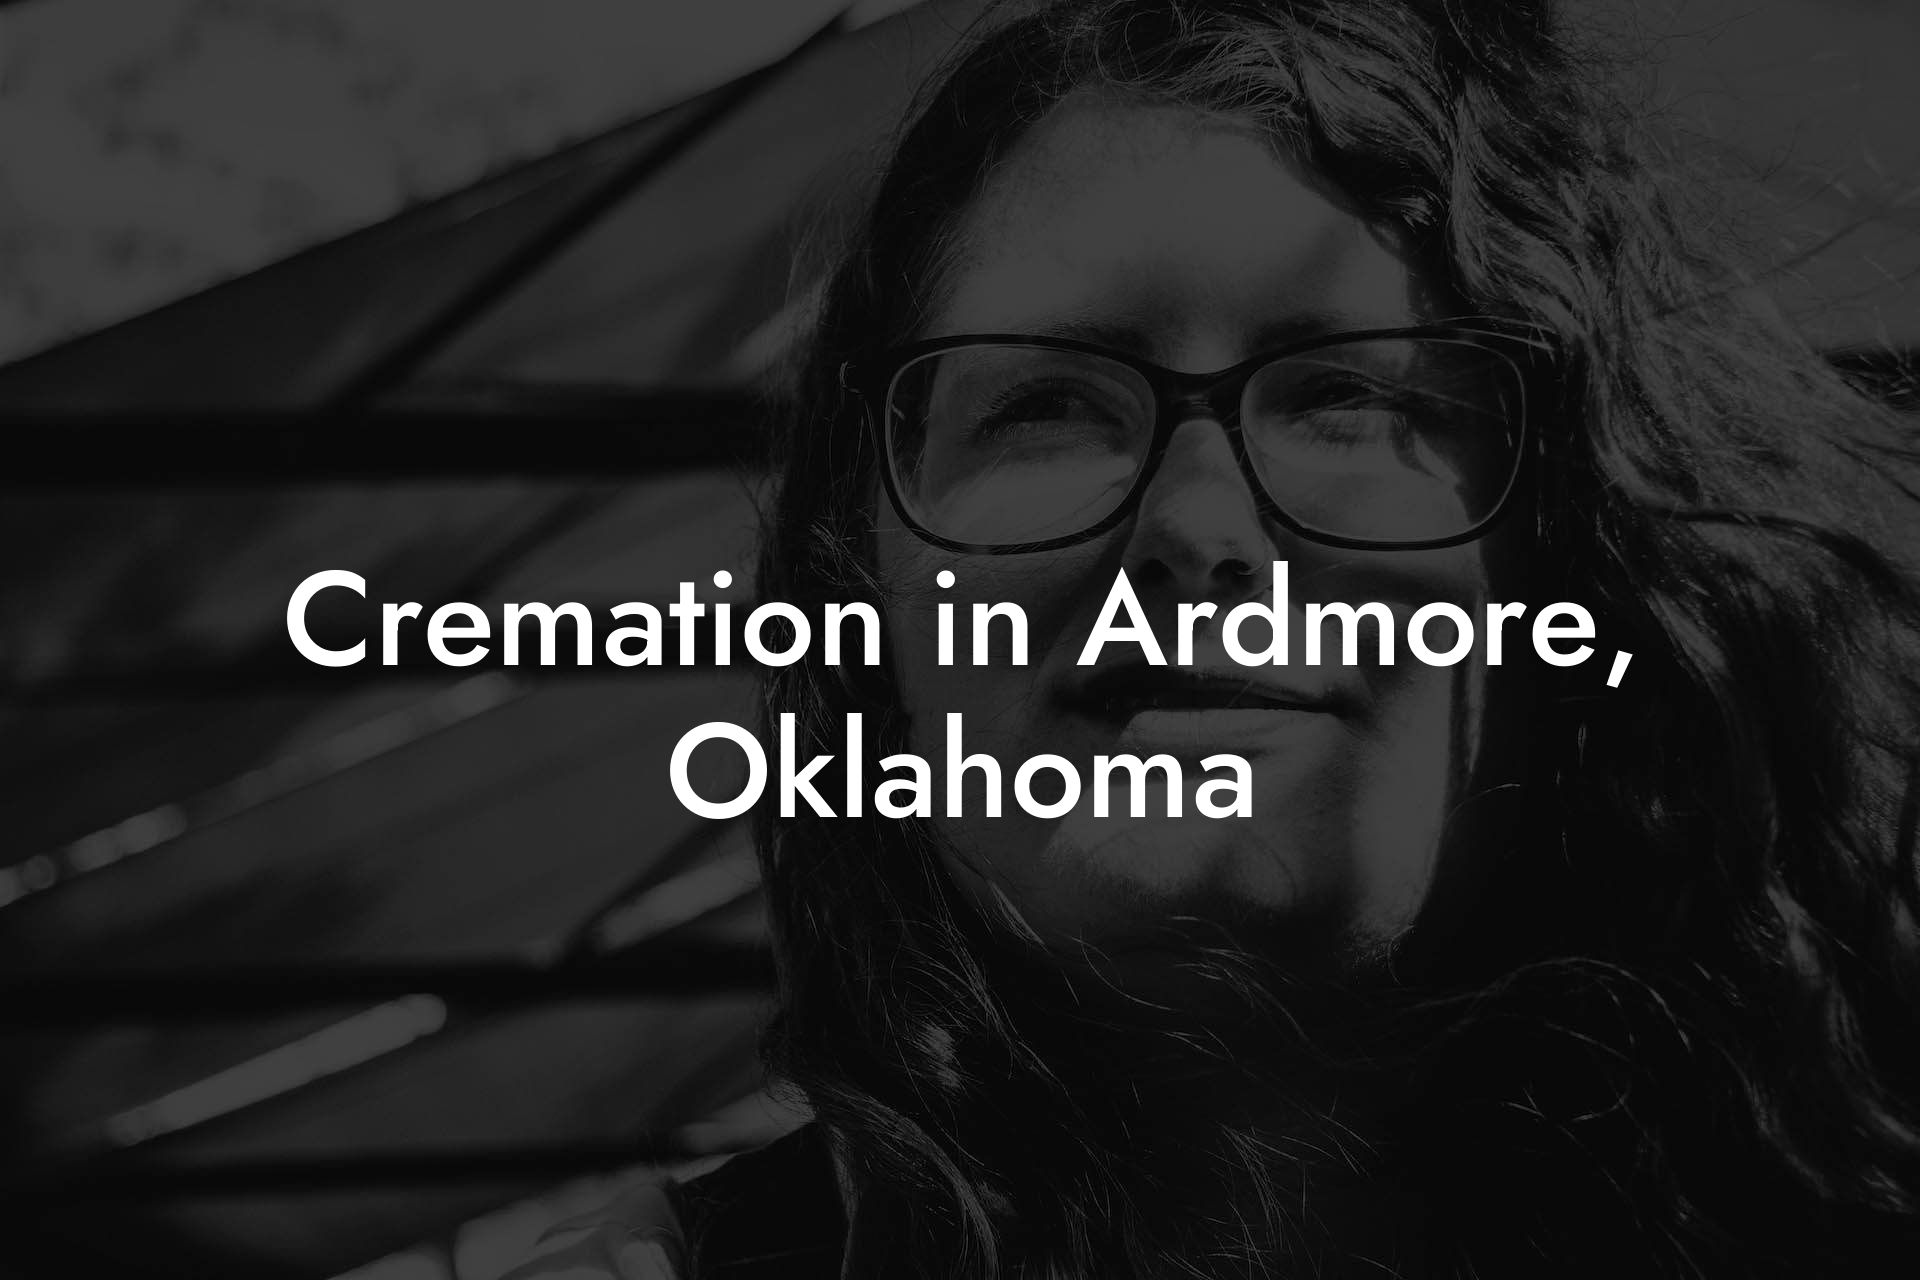 Cremation in Ardmore, Oklahoma